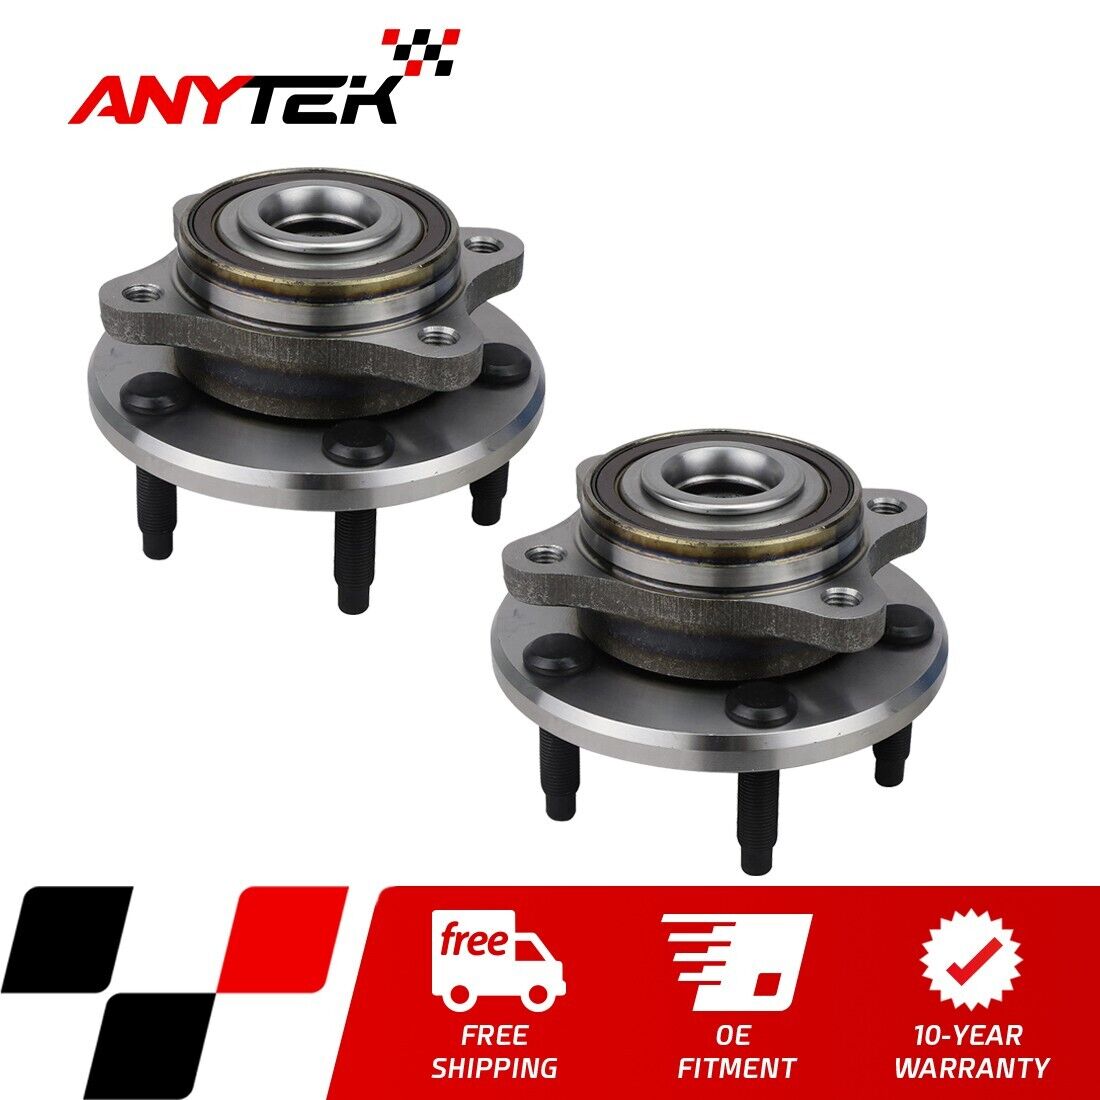 2PC Rear Wheel Hub Bearing for 2005-2007 Ford Five Hundred Freestyle Montego 2WD